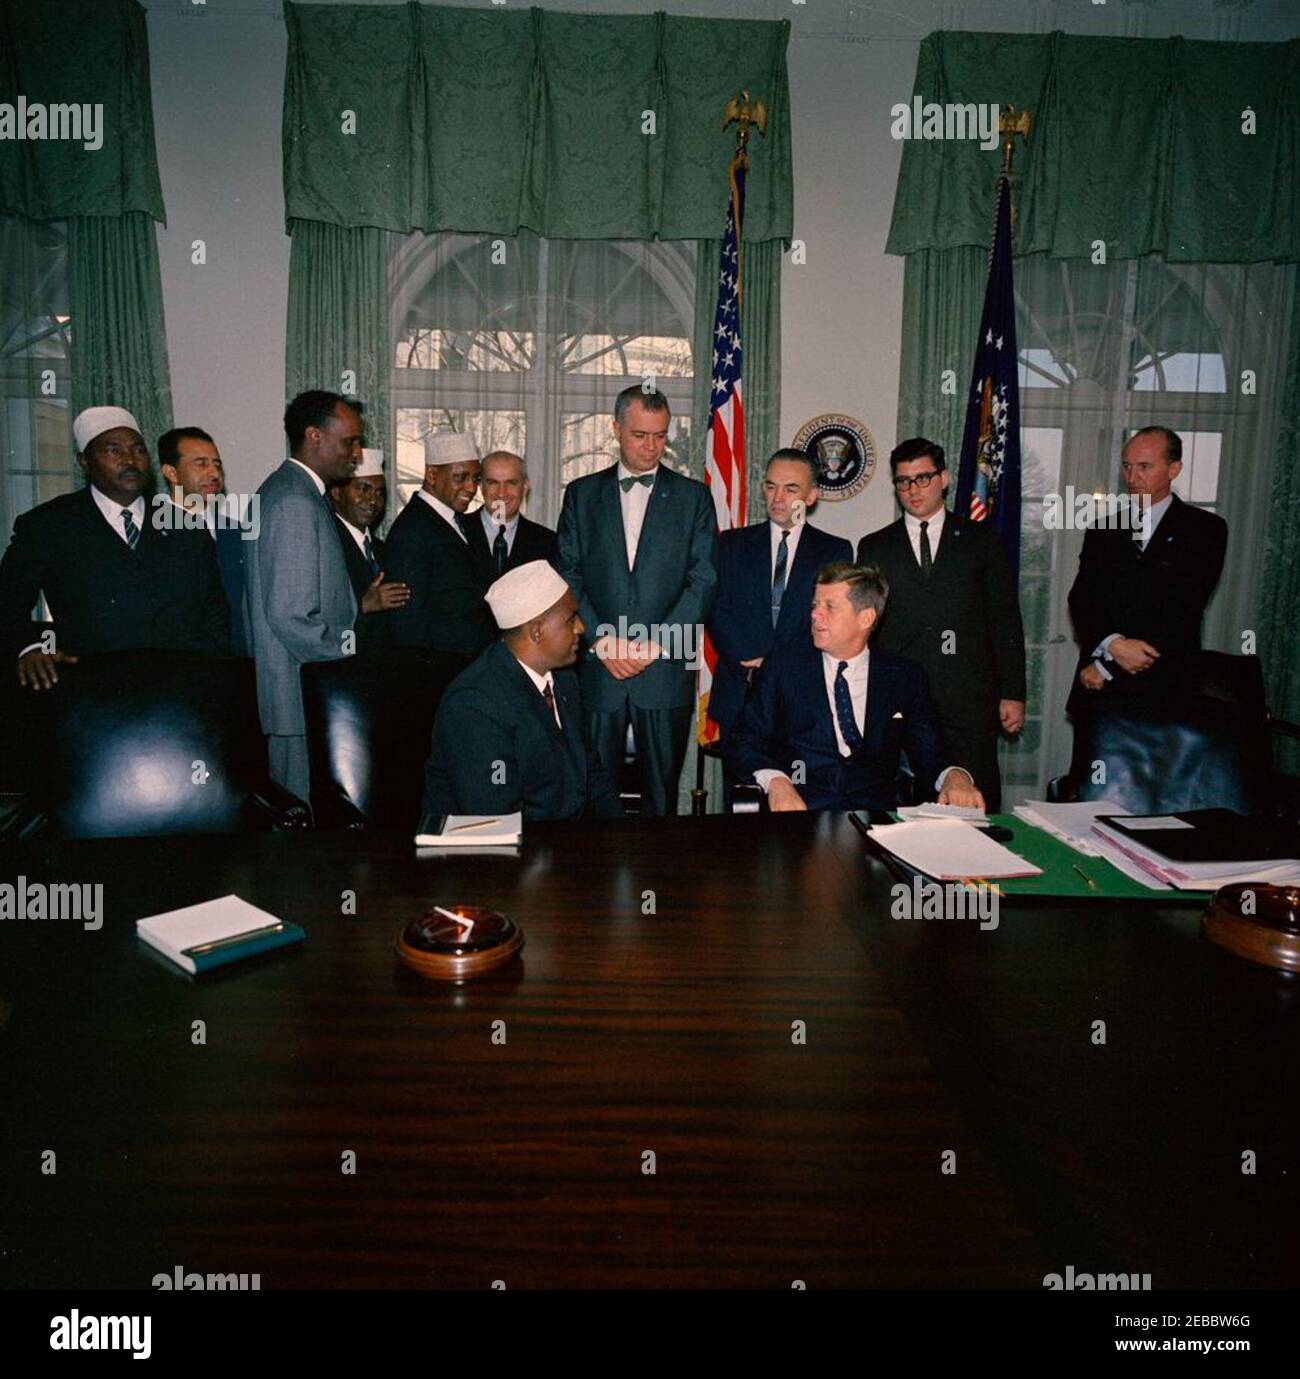 Meeting with Abdirashid Ali Shermarke, Prime Minister of the Somali Republic, 12:00PM. President John F. Kennedy meets with Prime Minister of the Somali Republic, Dr. Abdirashid Ali Shermarke (seated in center). Also pictured: Ambassador of the Somali Republic, Dr. Omar Mohallim Mohamed; Minister of Foreign Affairs of the Somali Republic, Abdullahi Issa Mohamud; U.S. Deputy Assistant Secretary of State for African Affairs, Henry J. Tasca; Assistant Secretary of State for African Affairs, G. Mennen u0022Soapyu0022 Williams; deputy administrator of the Agency for International Development (AID Stock Photo